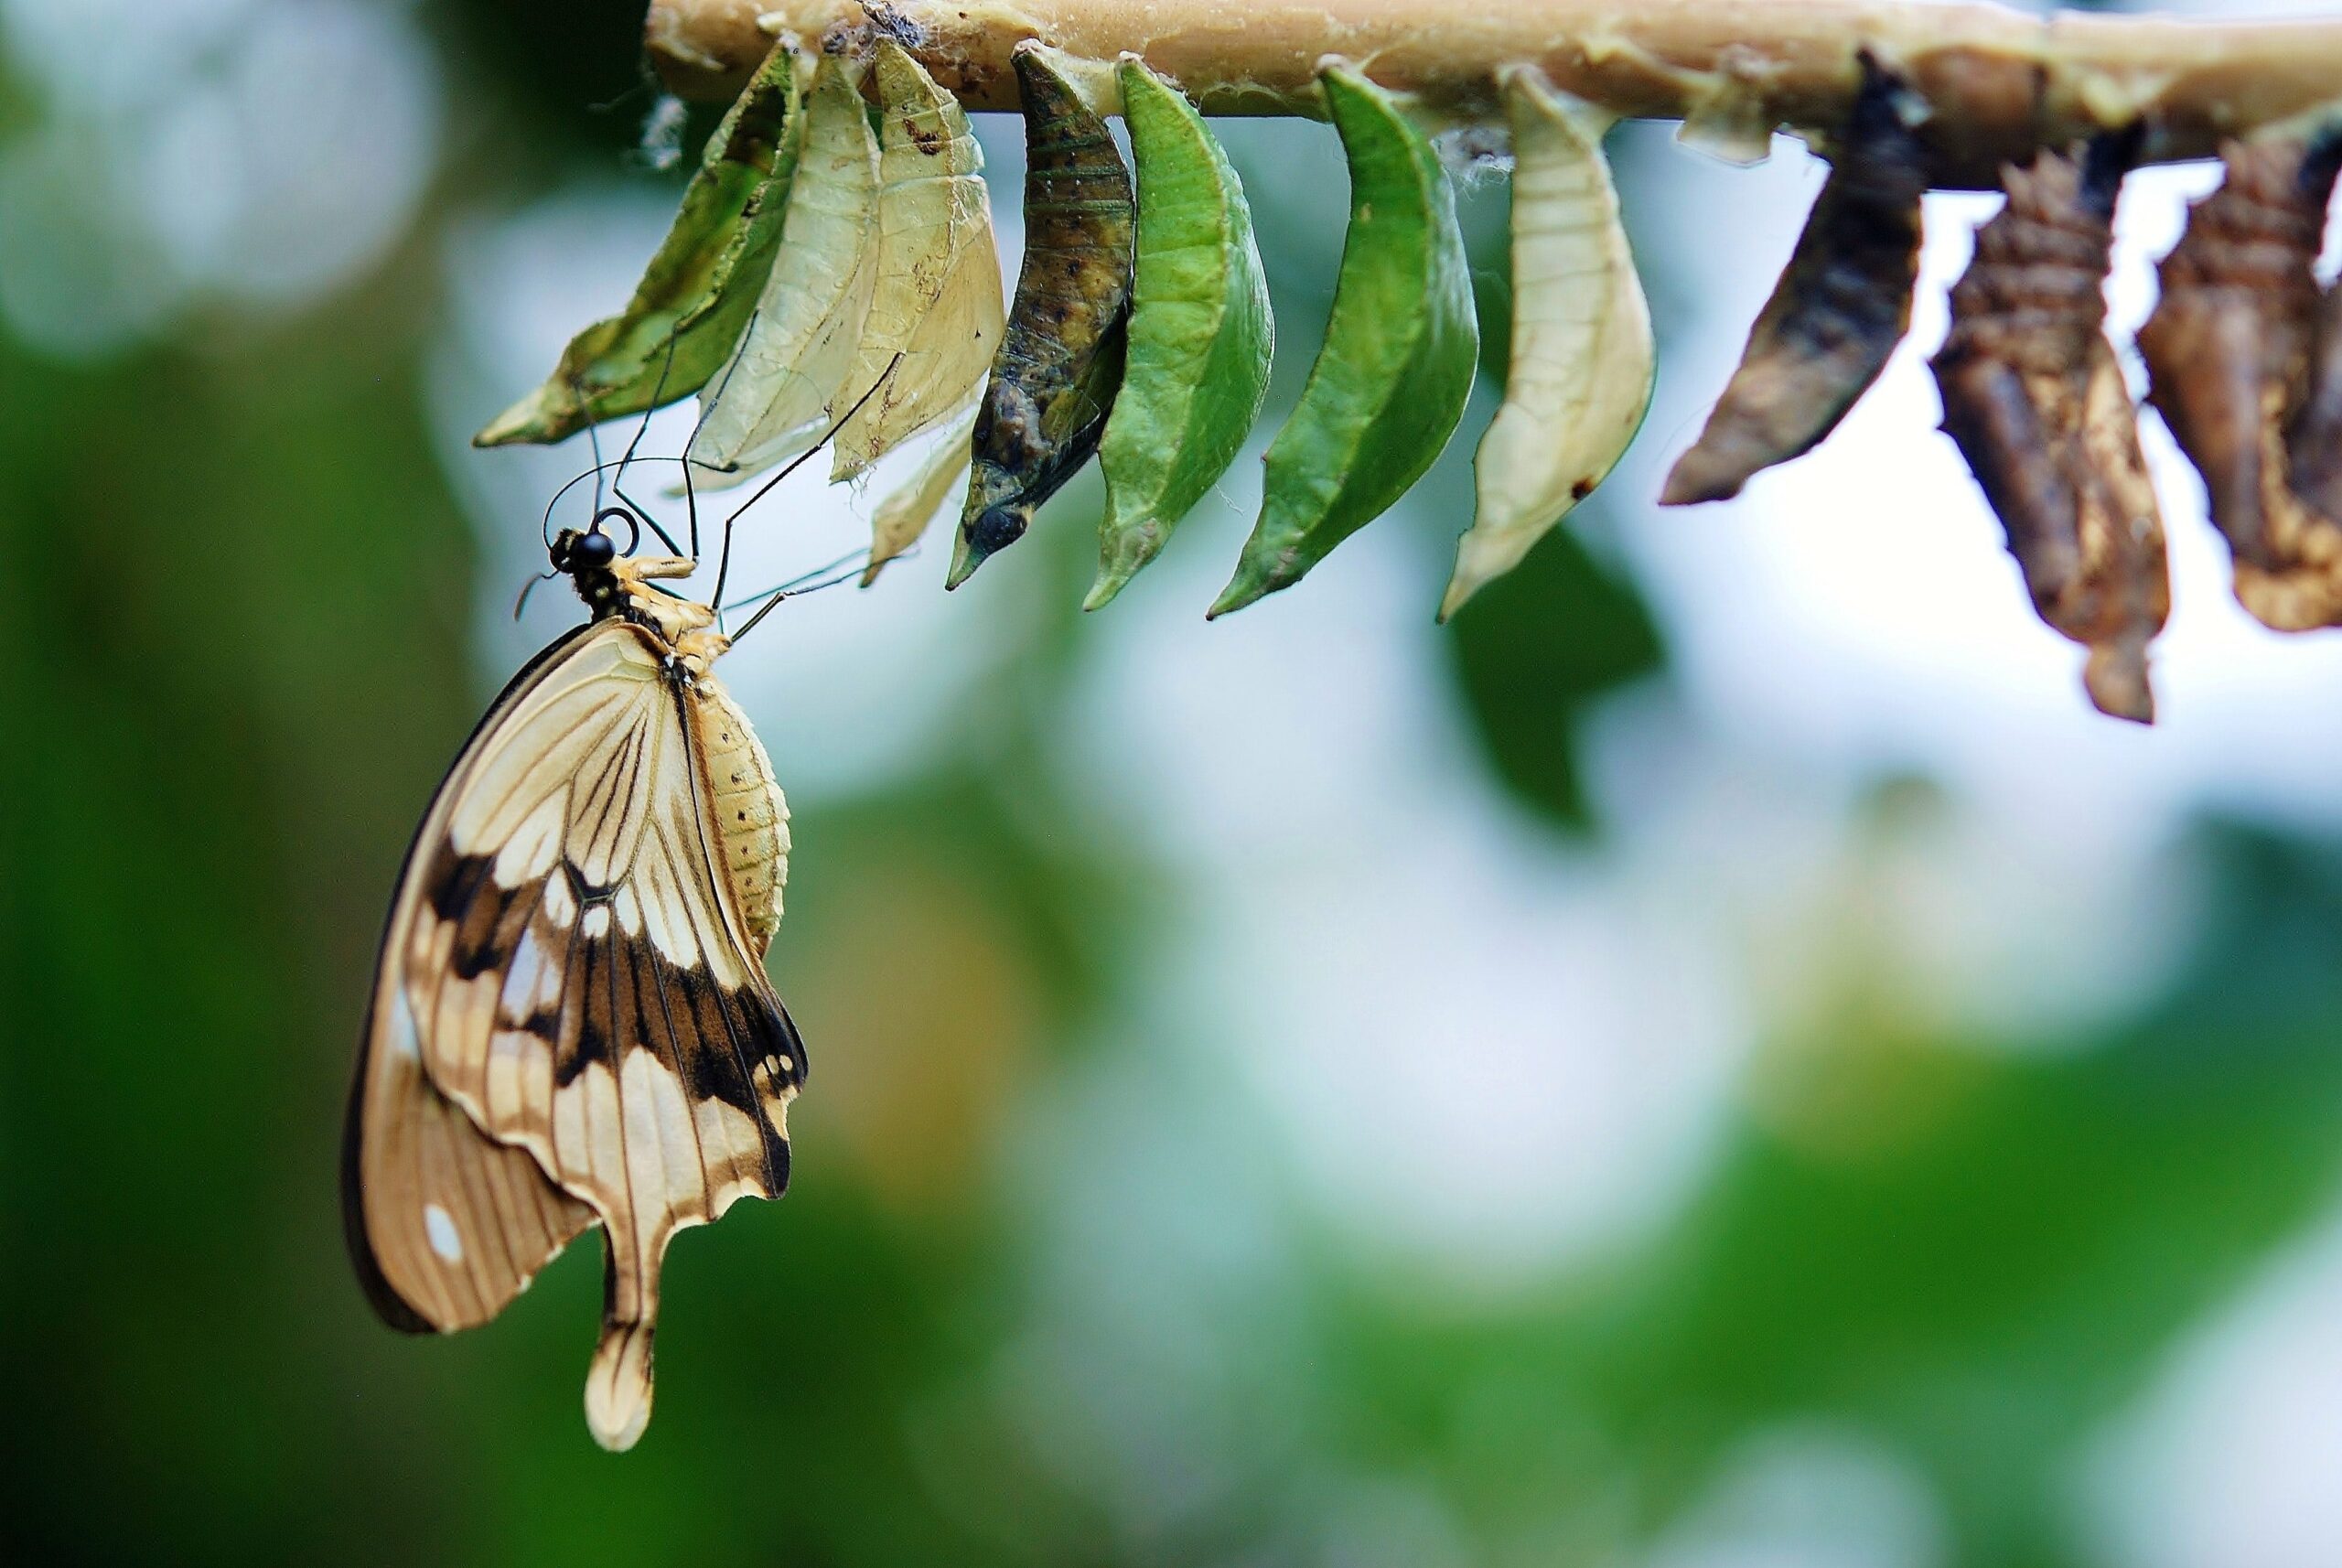 butterfly hatching from cocoon near unhatched cocoons